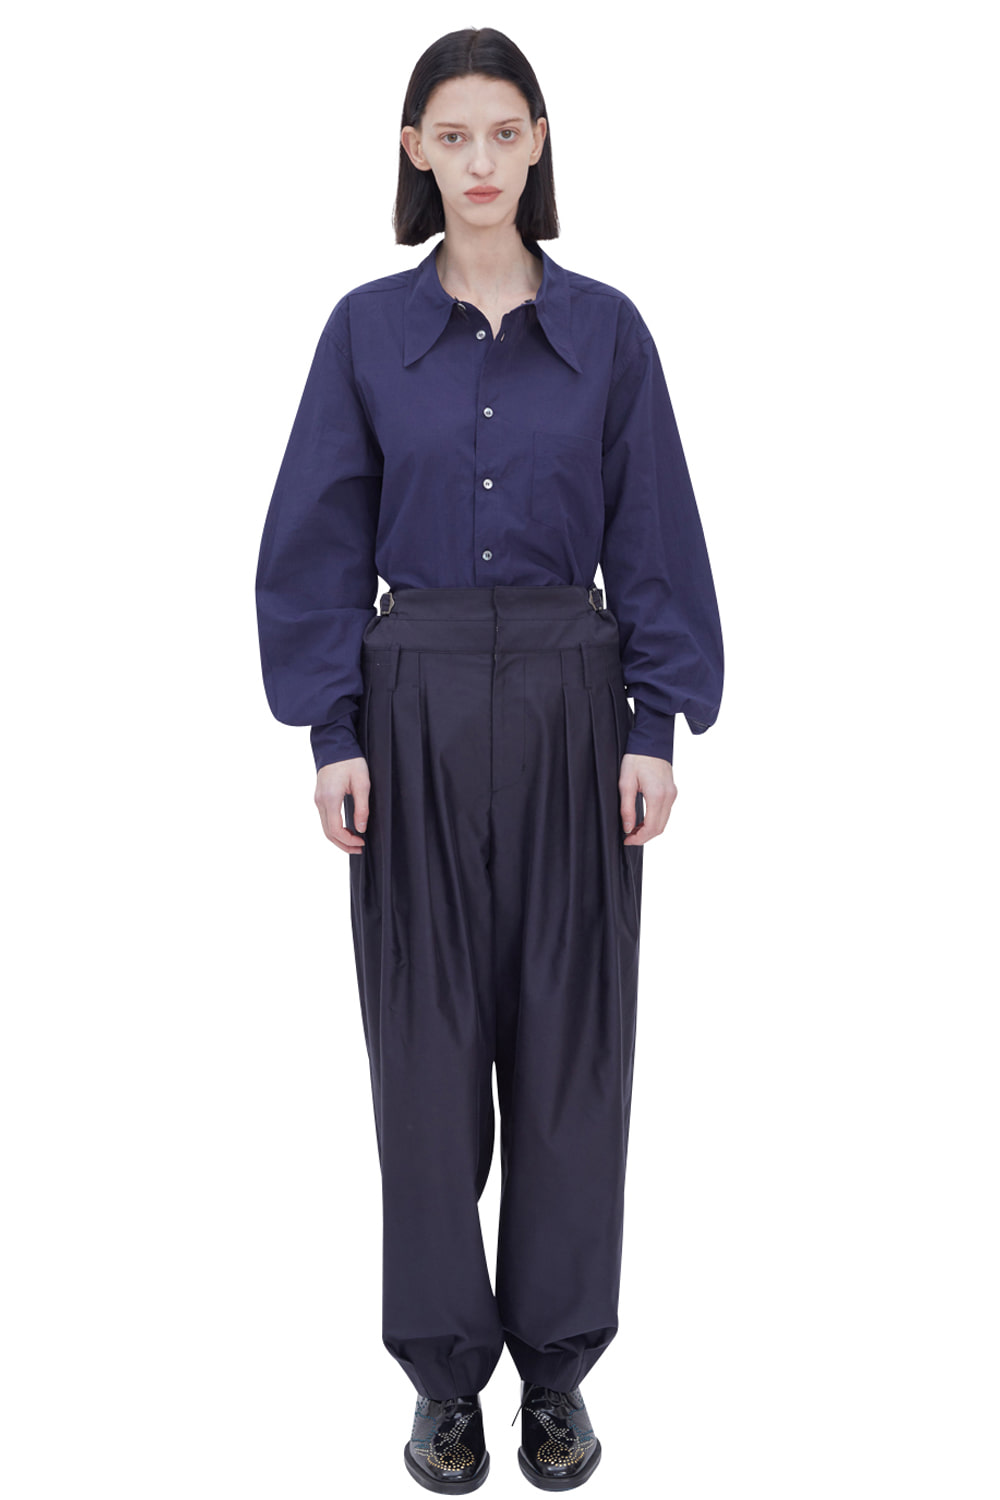 NAVY DOUBLE WAIST TAPERED PANTS